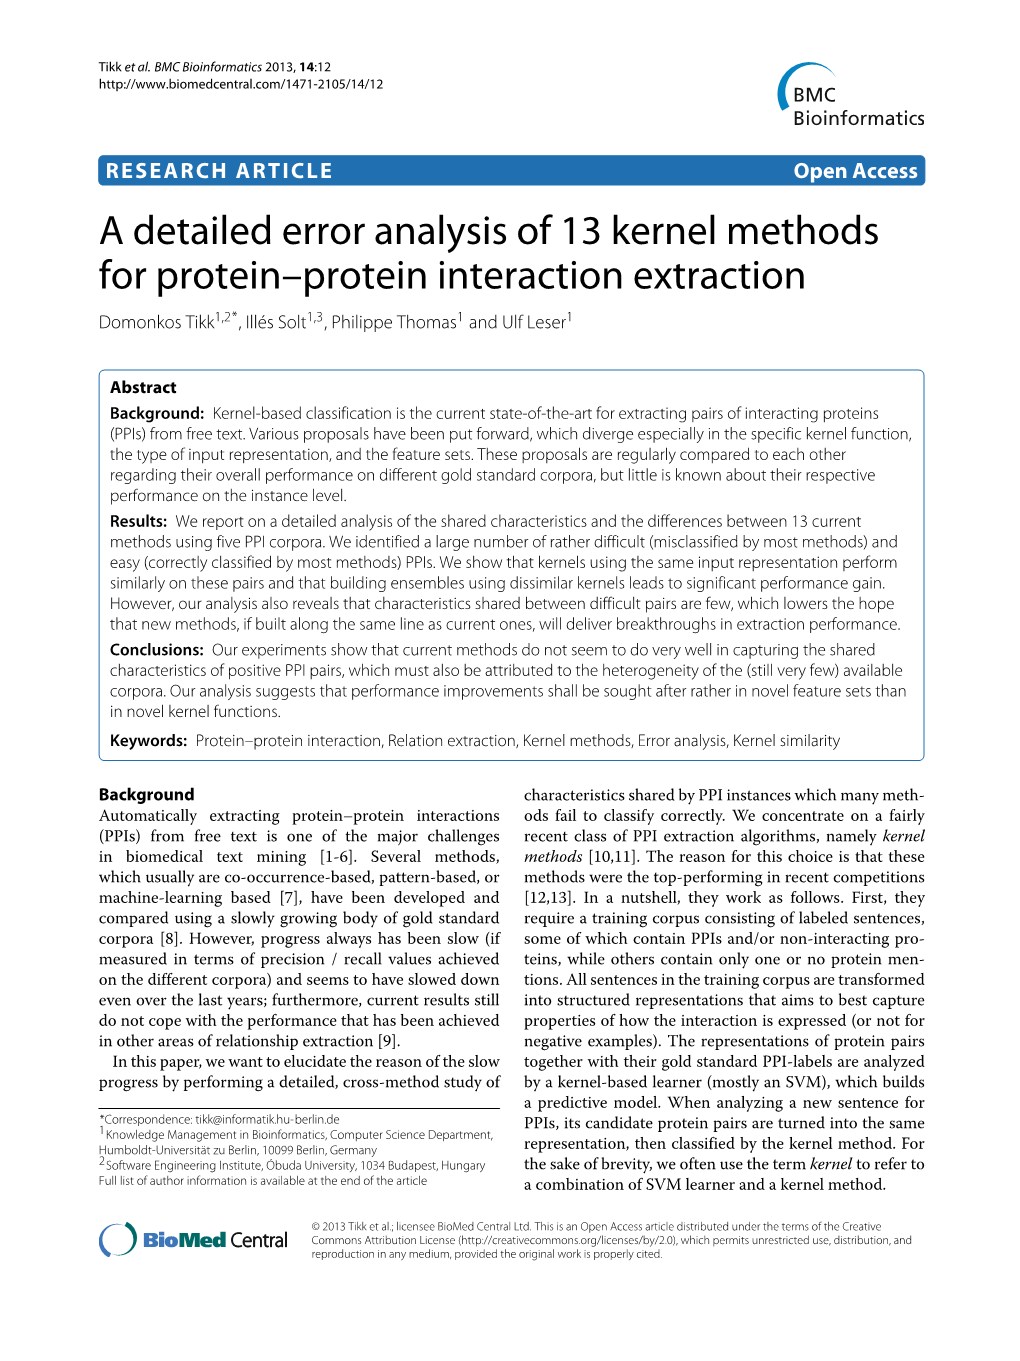 A Detailed Error Analysis of 13 Kernel Methods for Protein–Protein Interaction Extraction Domonkos Tikk1,2*, Illés Solt1,3, Philippe Thomas1 and Ulf Leser1